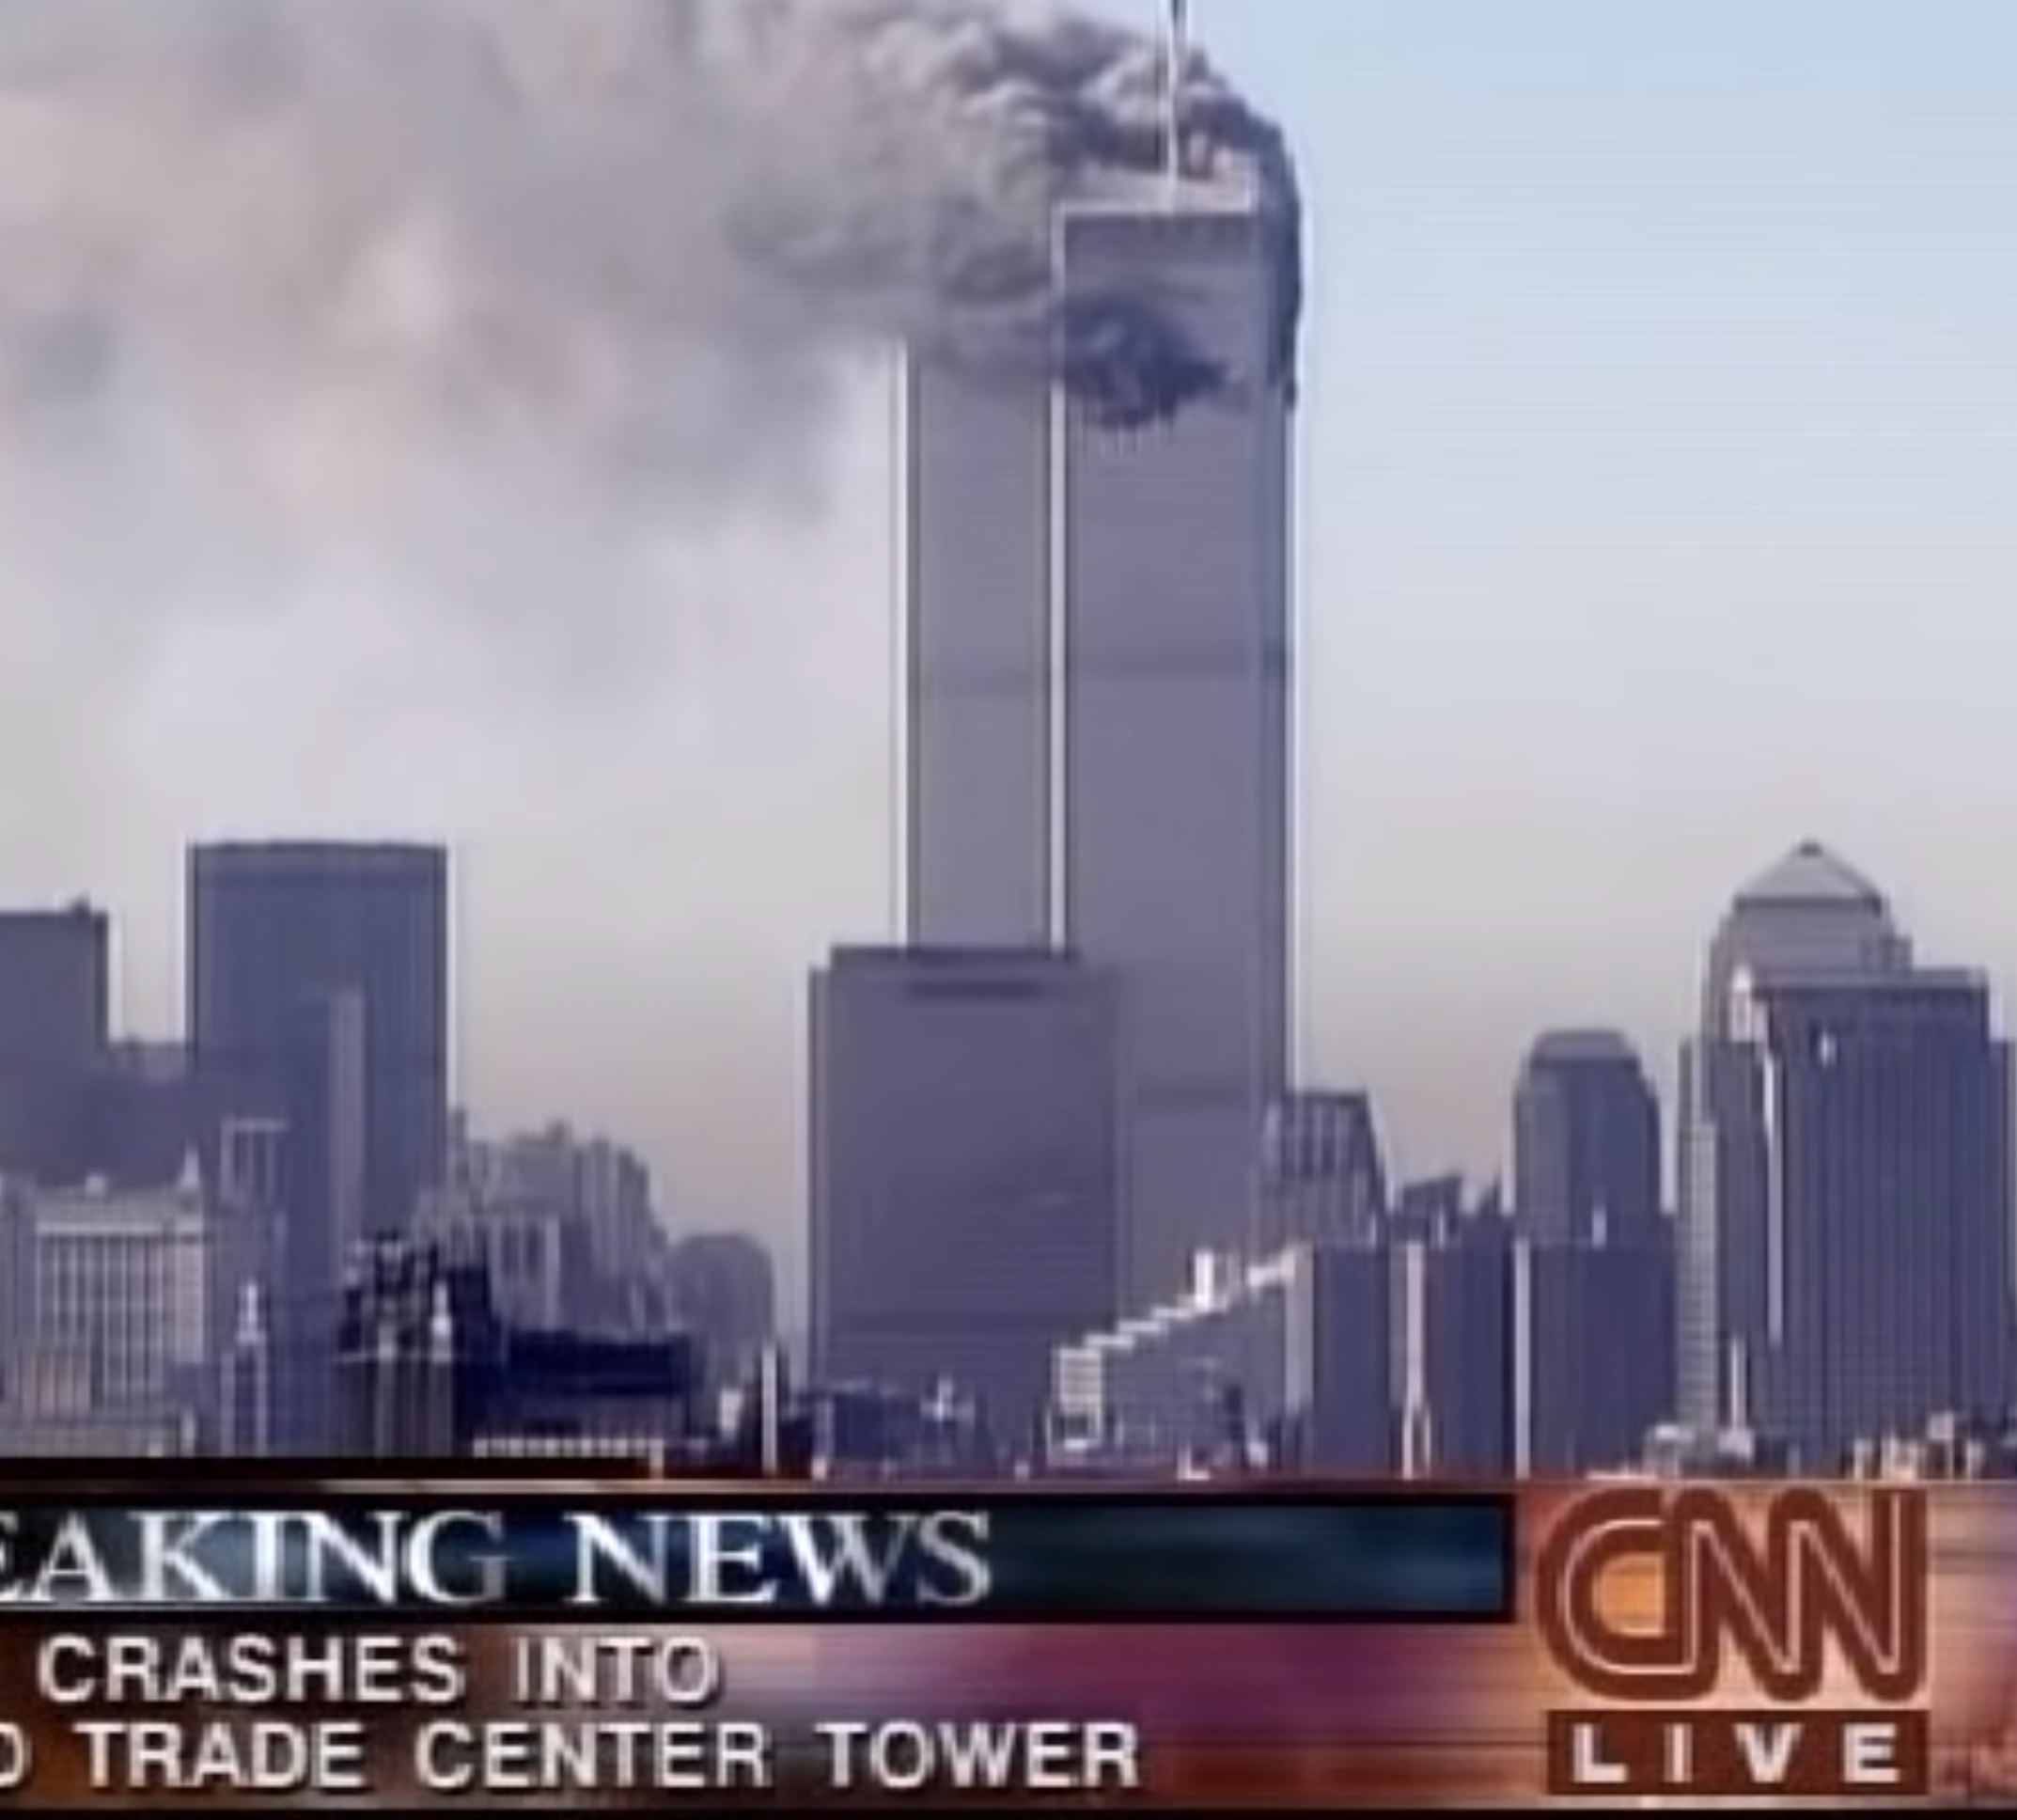 Why Did YouTube Mass Recommend That People Watch News Footage of the 9/11 Attacks?